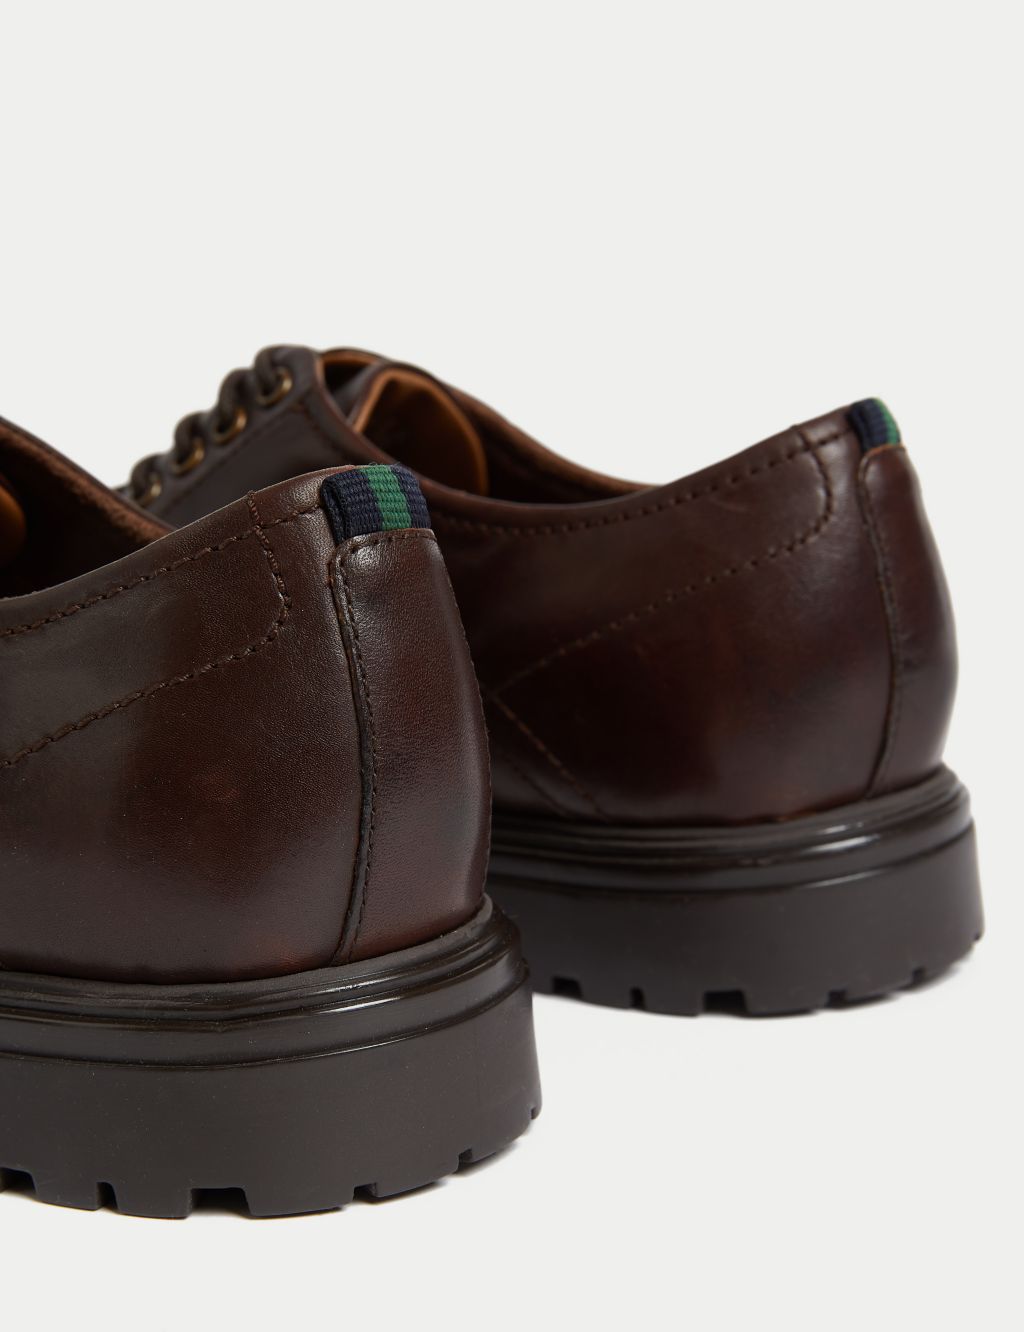 Leather Derby Heritage Shoes image 3